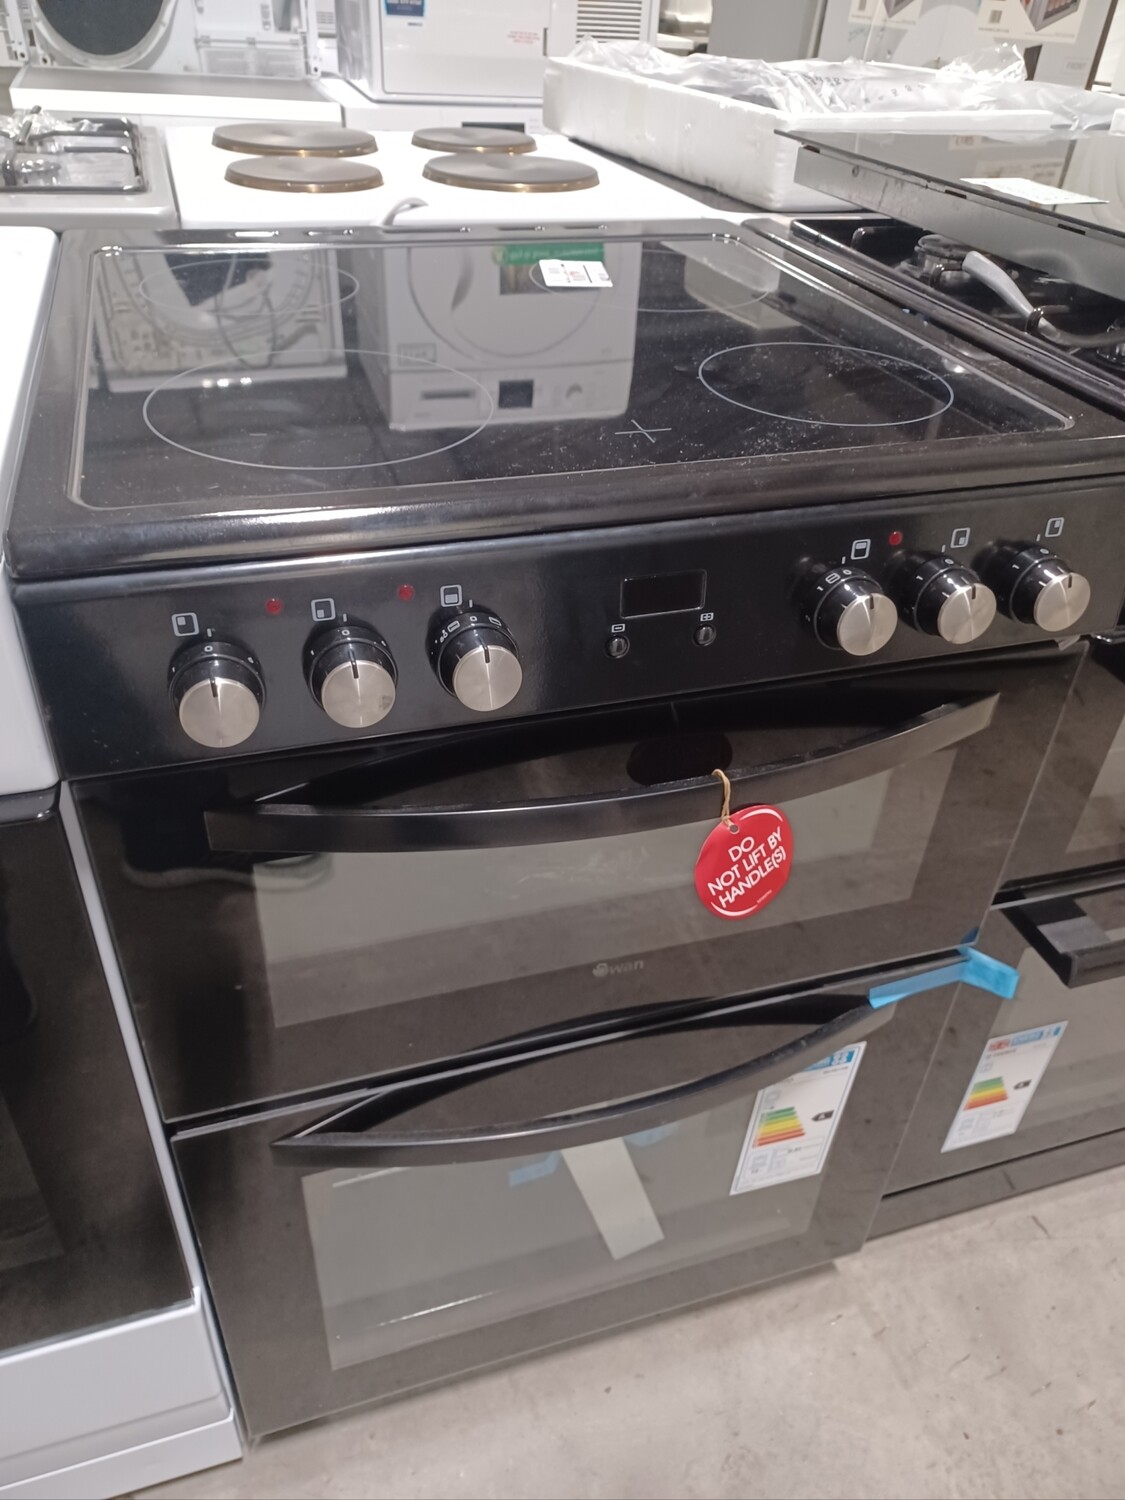 Swan SW158110B 60cm Electric Cooker with Ceramic Hob - Black - New Graded 12 Month Guarantee 